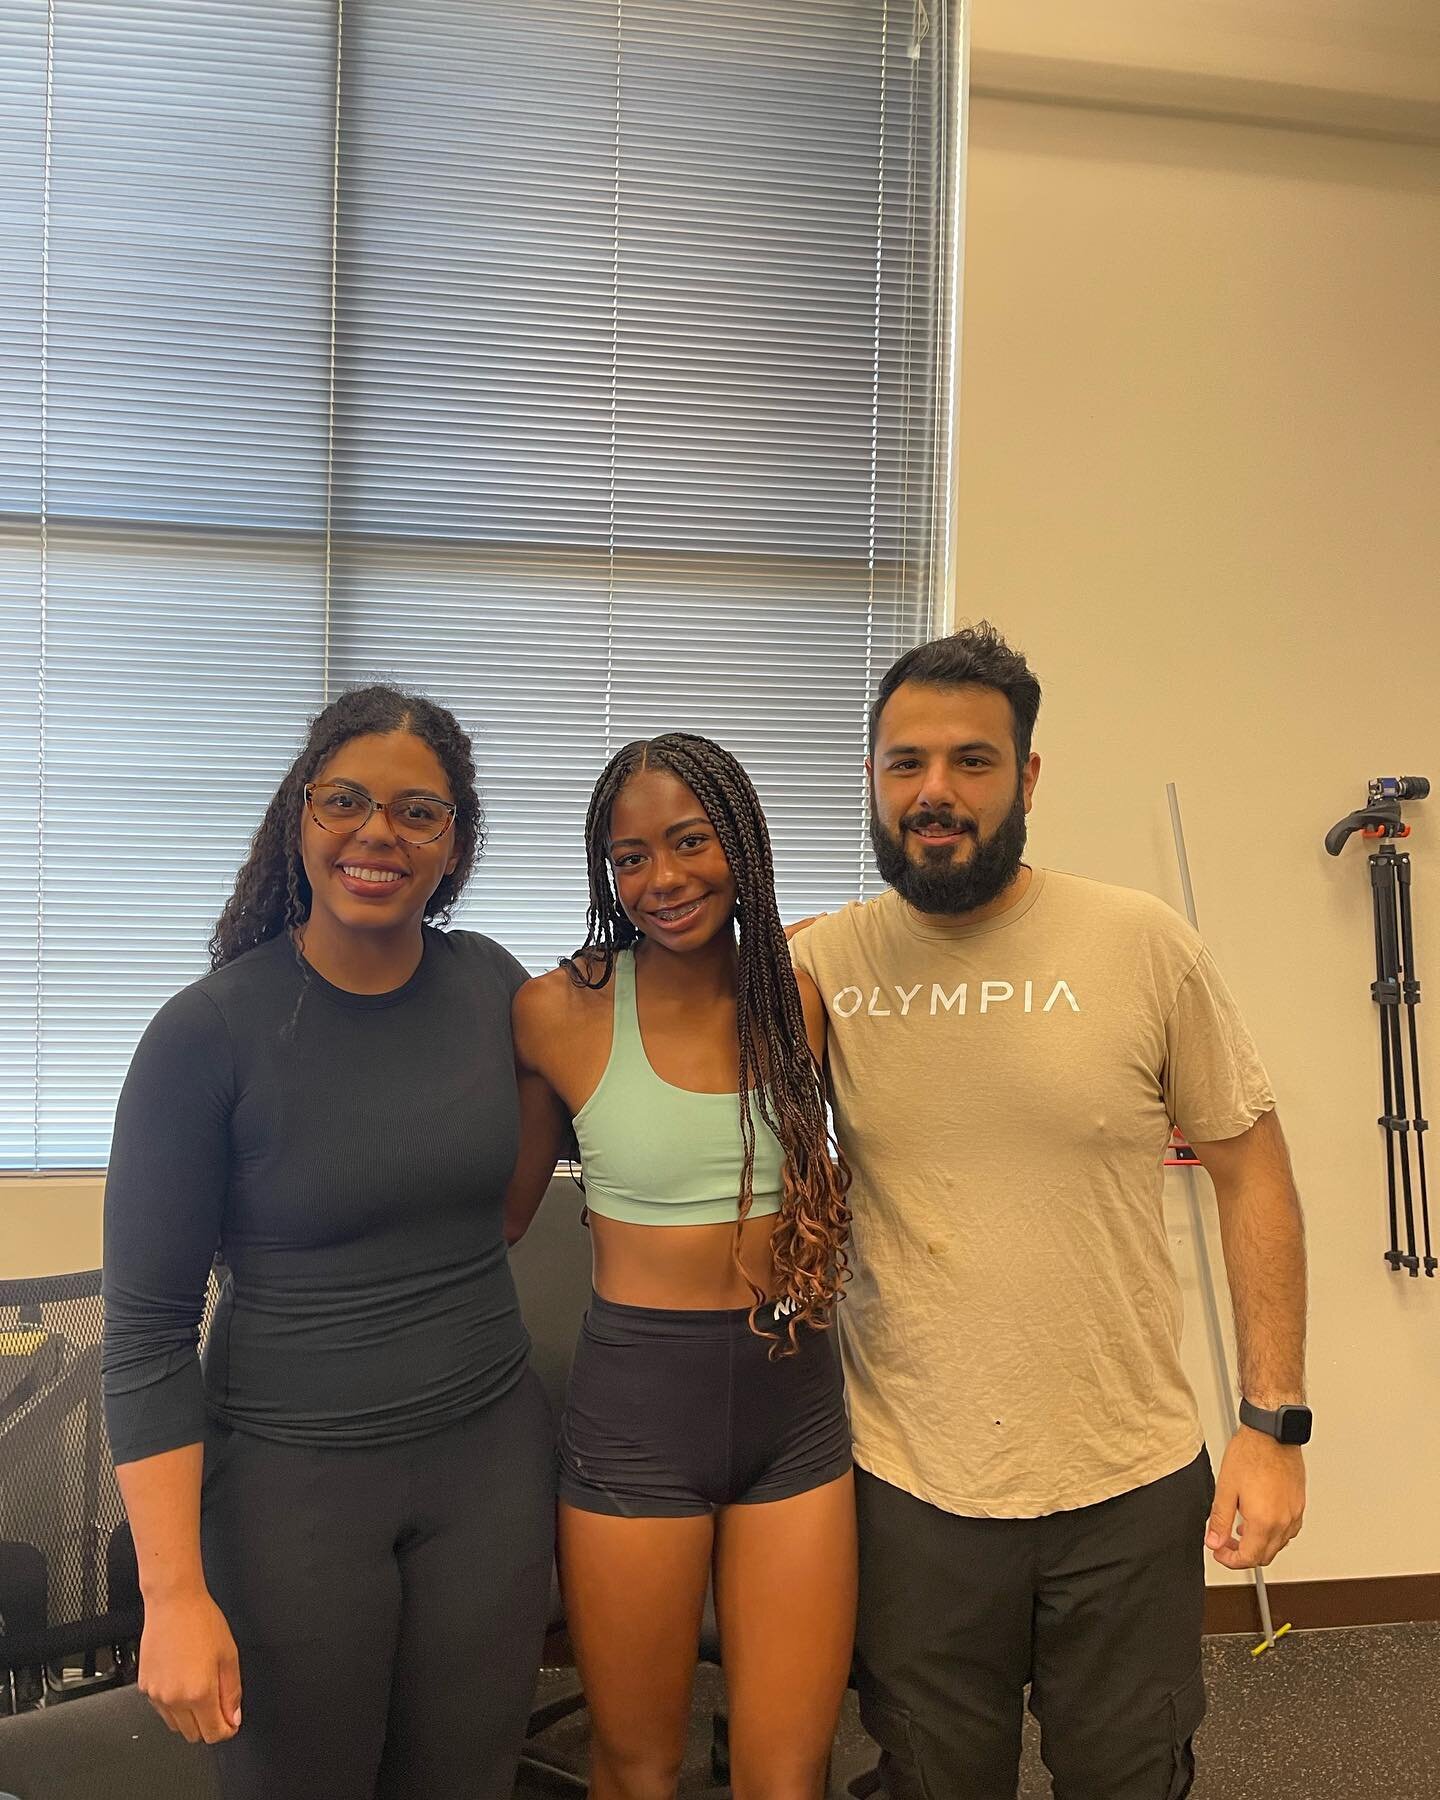 Team Olivia!🎉💪🏽 
&bull;&bull;&bull;&bull;&bull;&bull;&bull;
Stay tuned for some clips of her time with us💪🏽
&bull;&bull;&bull;&bull;&bull;&bull;
#olympia #physicaltherapy #movement #allthingsolympia #olyperformance